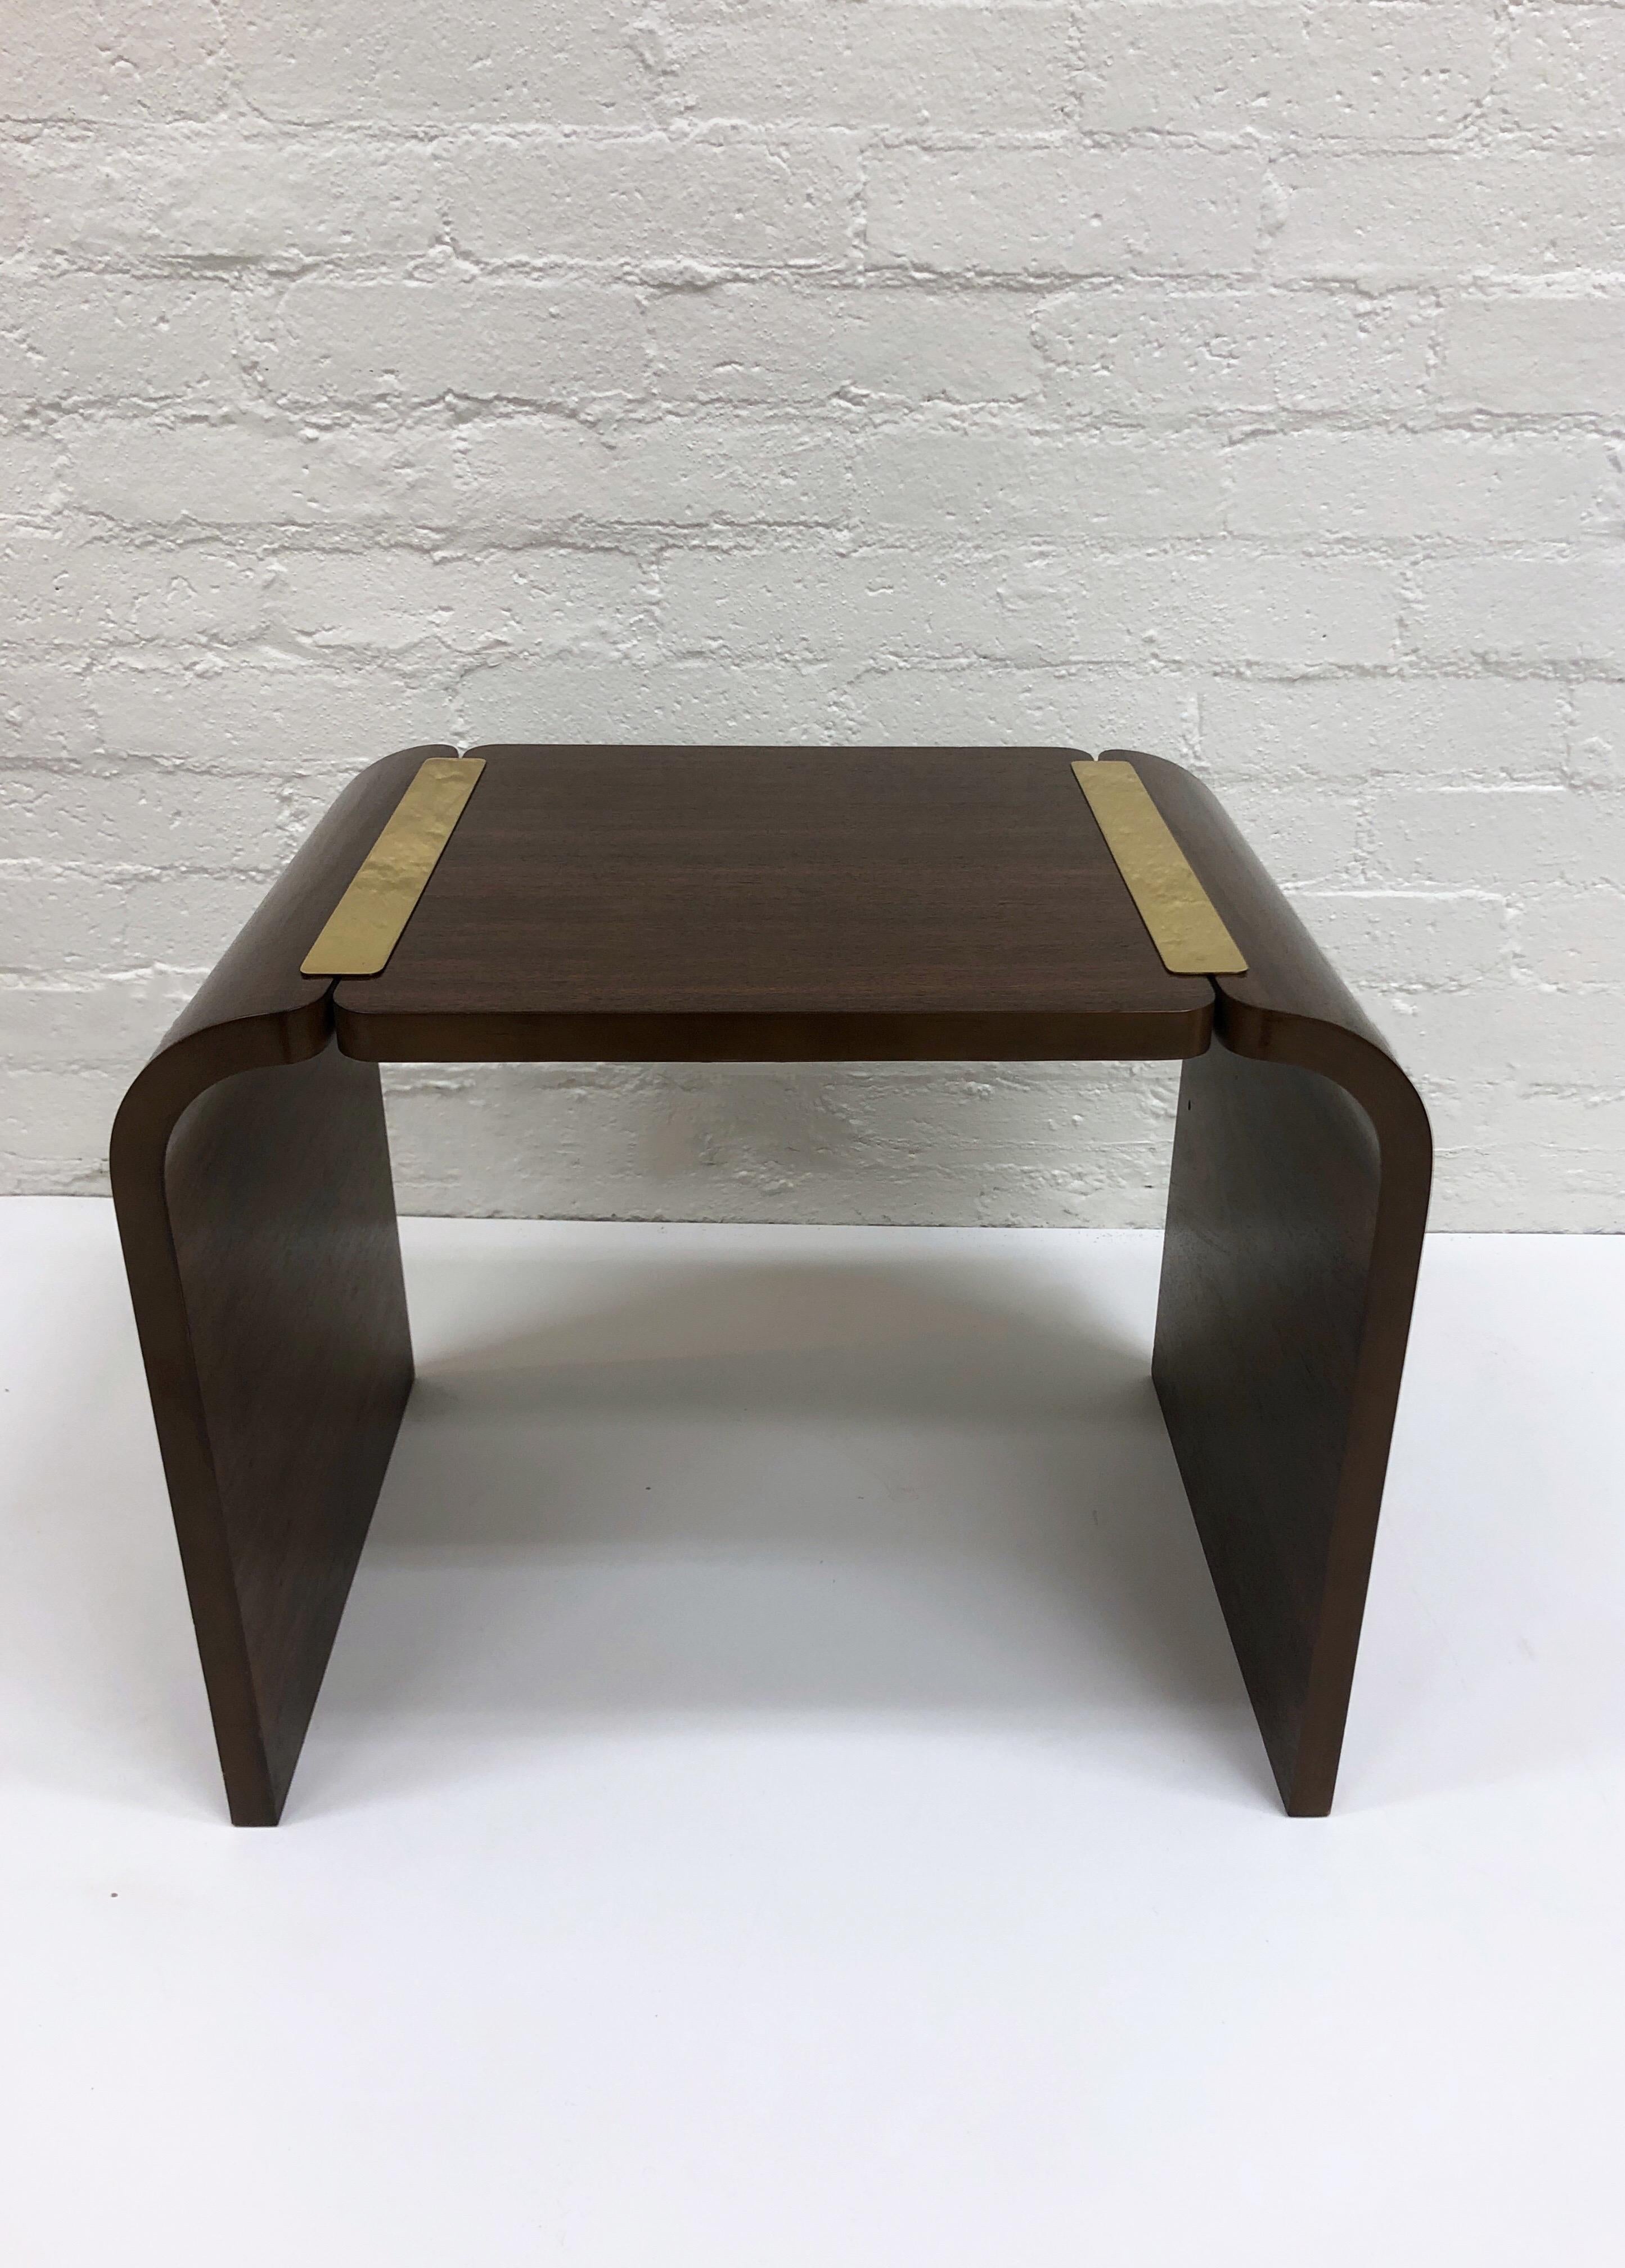 Dark walnut and polish brass Waterfall side table by Baker Furniture Co. Circa 1970’s. 
Original condition with minor wear consistent with age. 
Measurements: 27.75” Wide 20” Deep, 22” High.